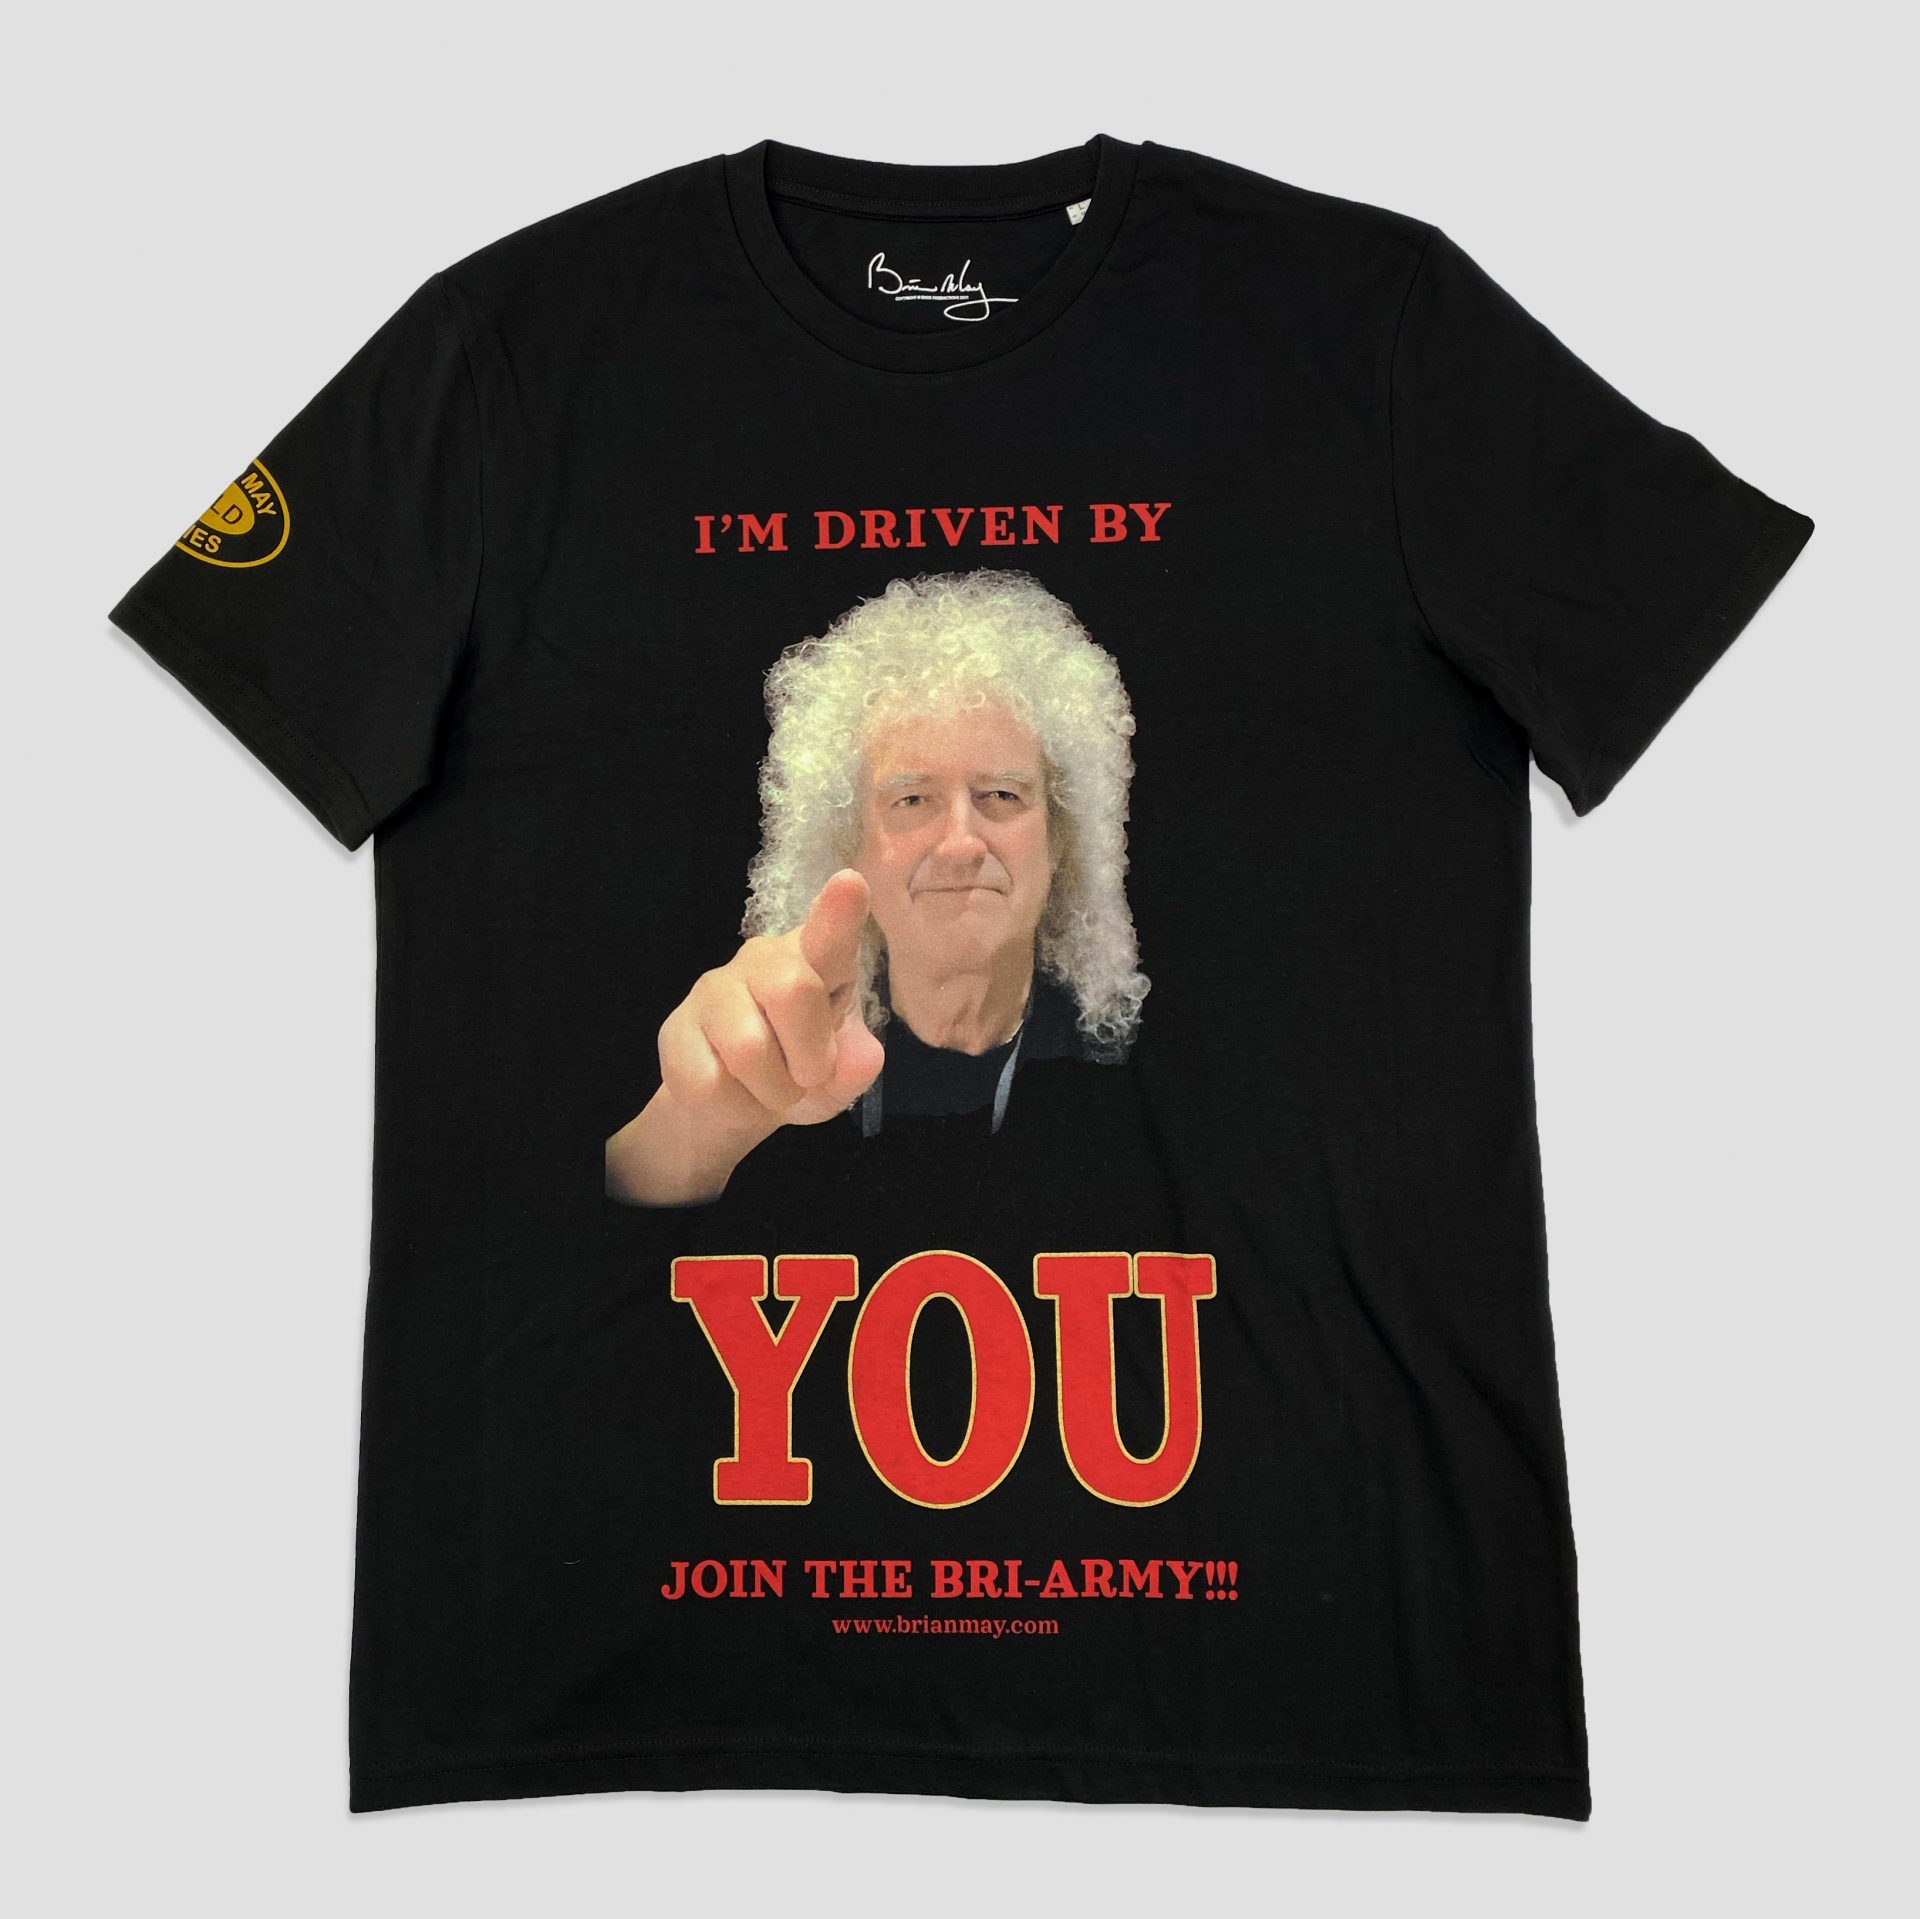 Bri-Army t-shirt DTG printed with screen printed details by Paul Bristow's